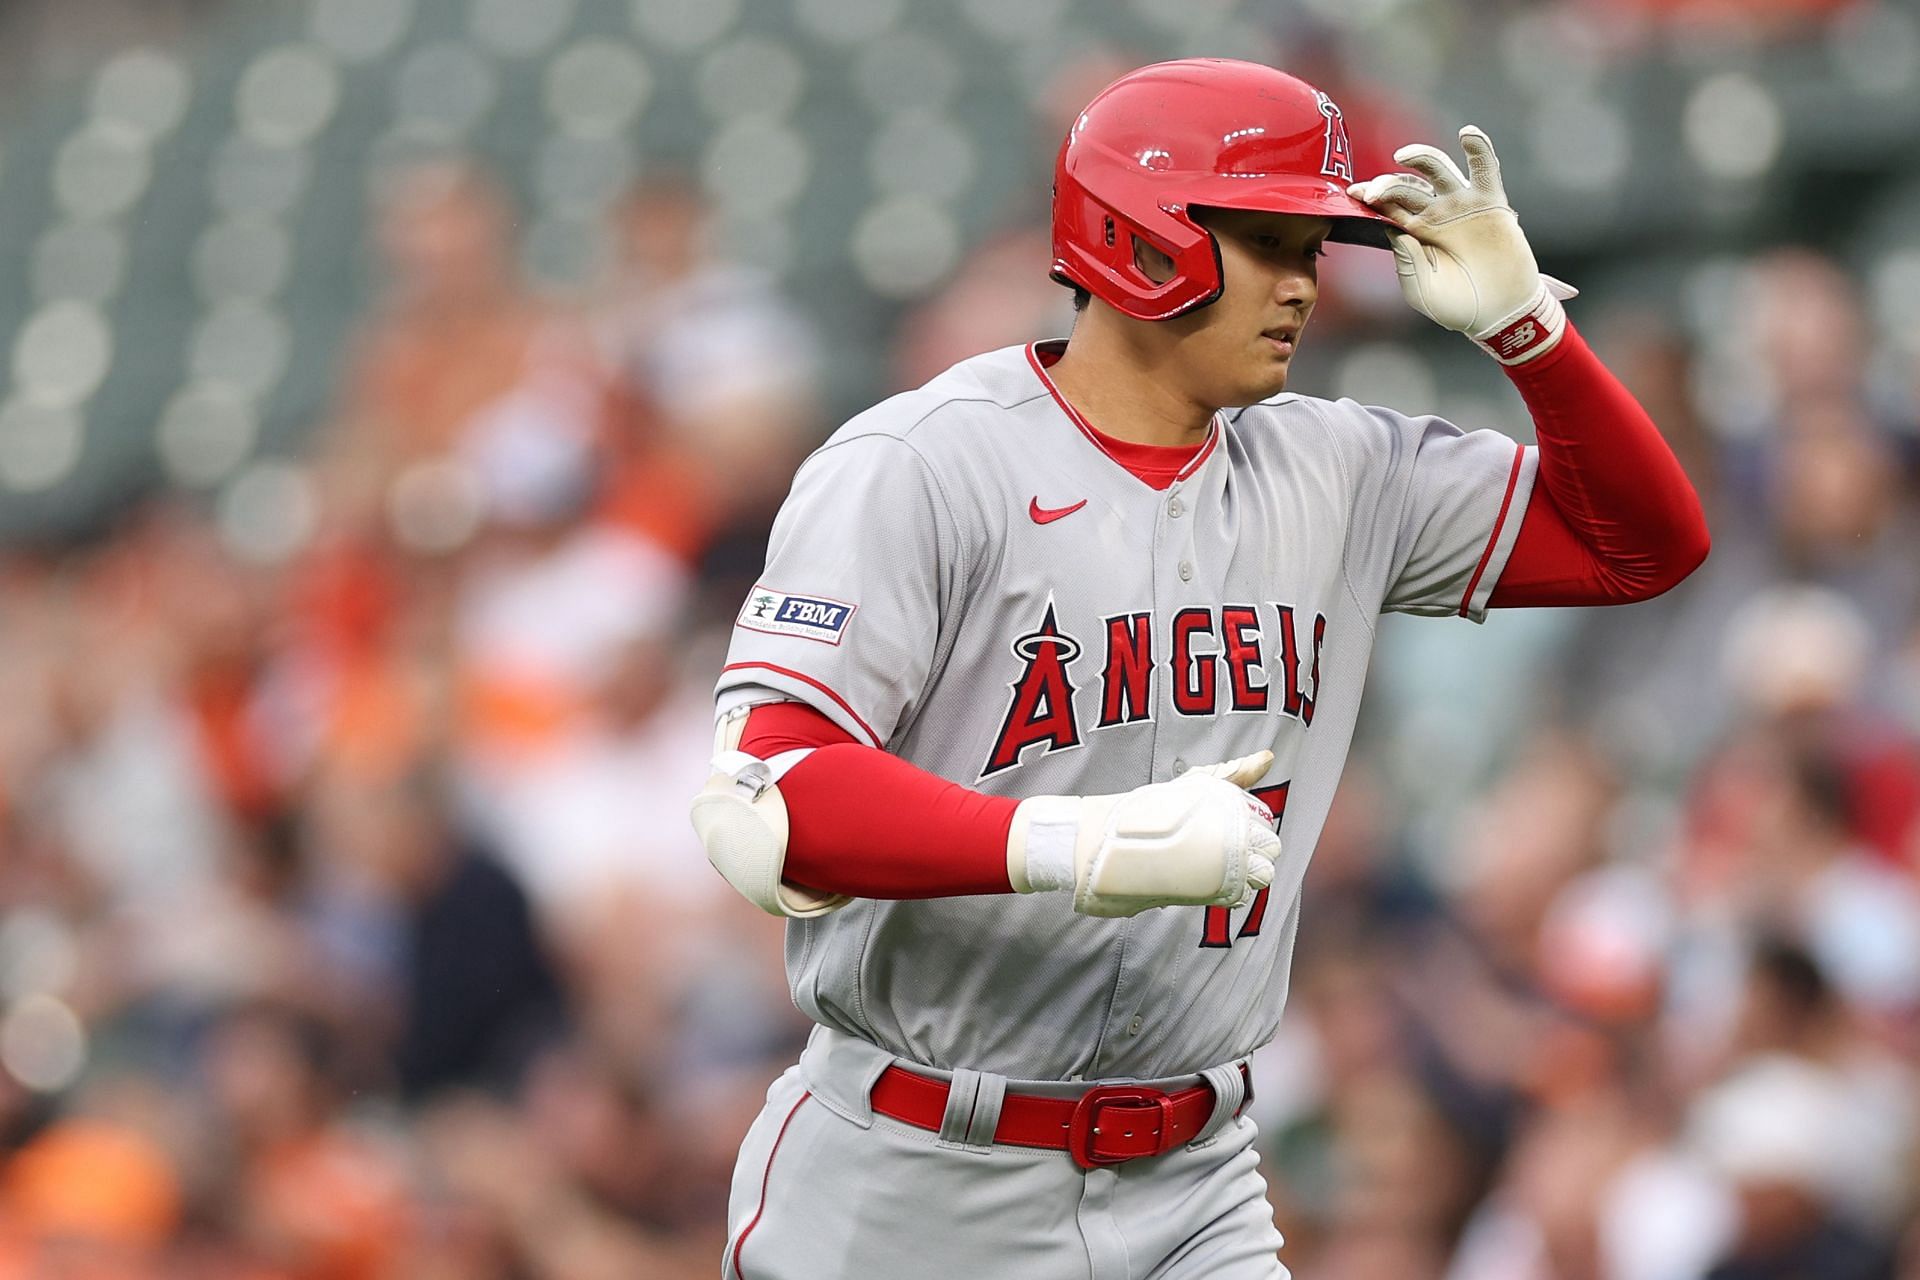 Los Angeles Angels v Baltimore Orioles BALTIMORE, MARYLAND - MAY 16: Shohei Ohtani #17 of the Los Angeles Angels reacts after batting against the Baltimore Orioles during the first inning at Oriole Park at Camden Yards on May 16, 2023 in Baltimore, Maryland. (Photo by Patrick Smith/Getty Images)